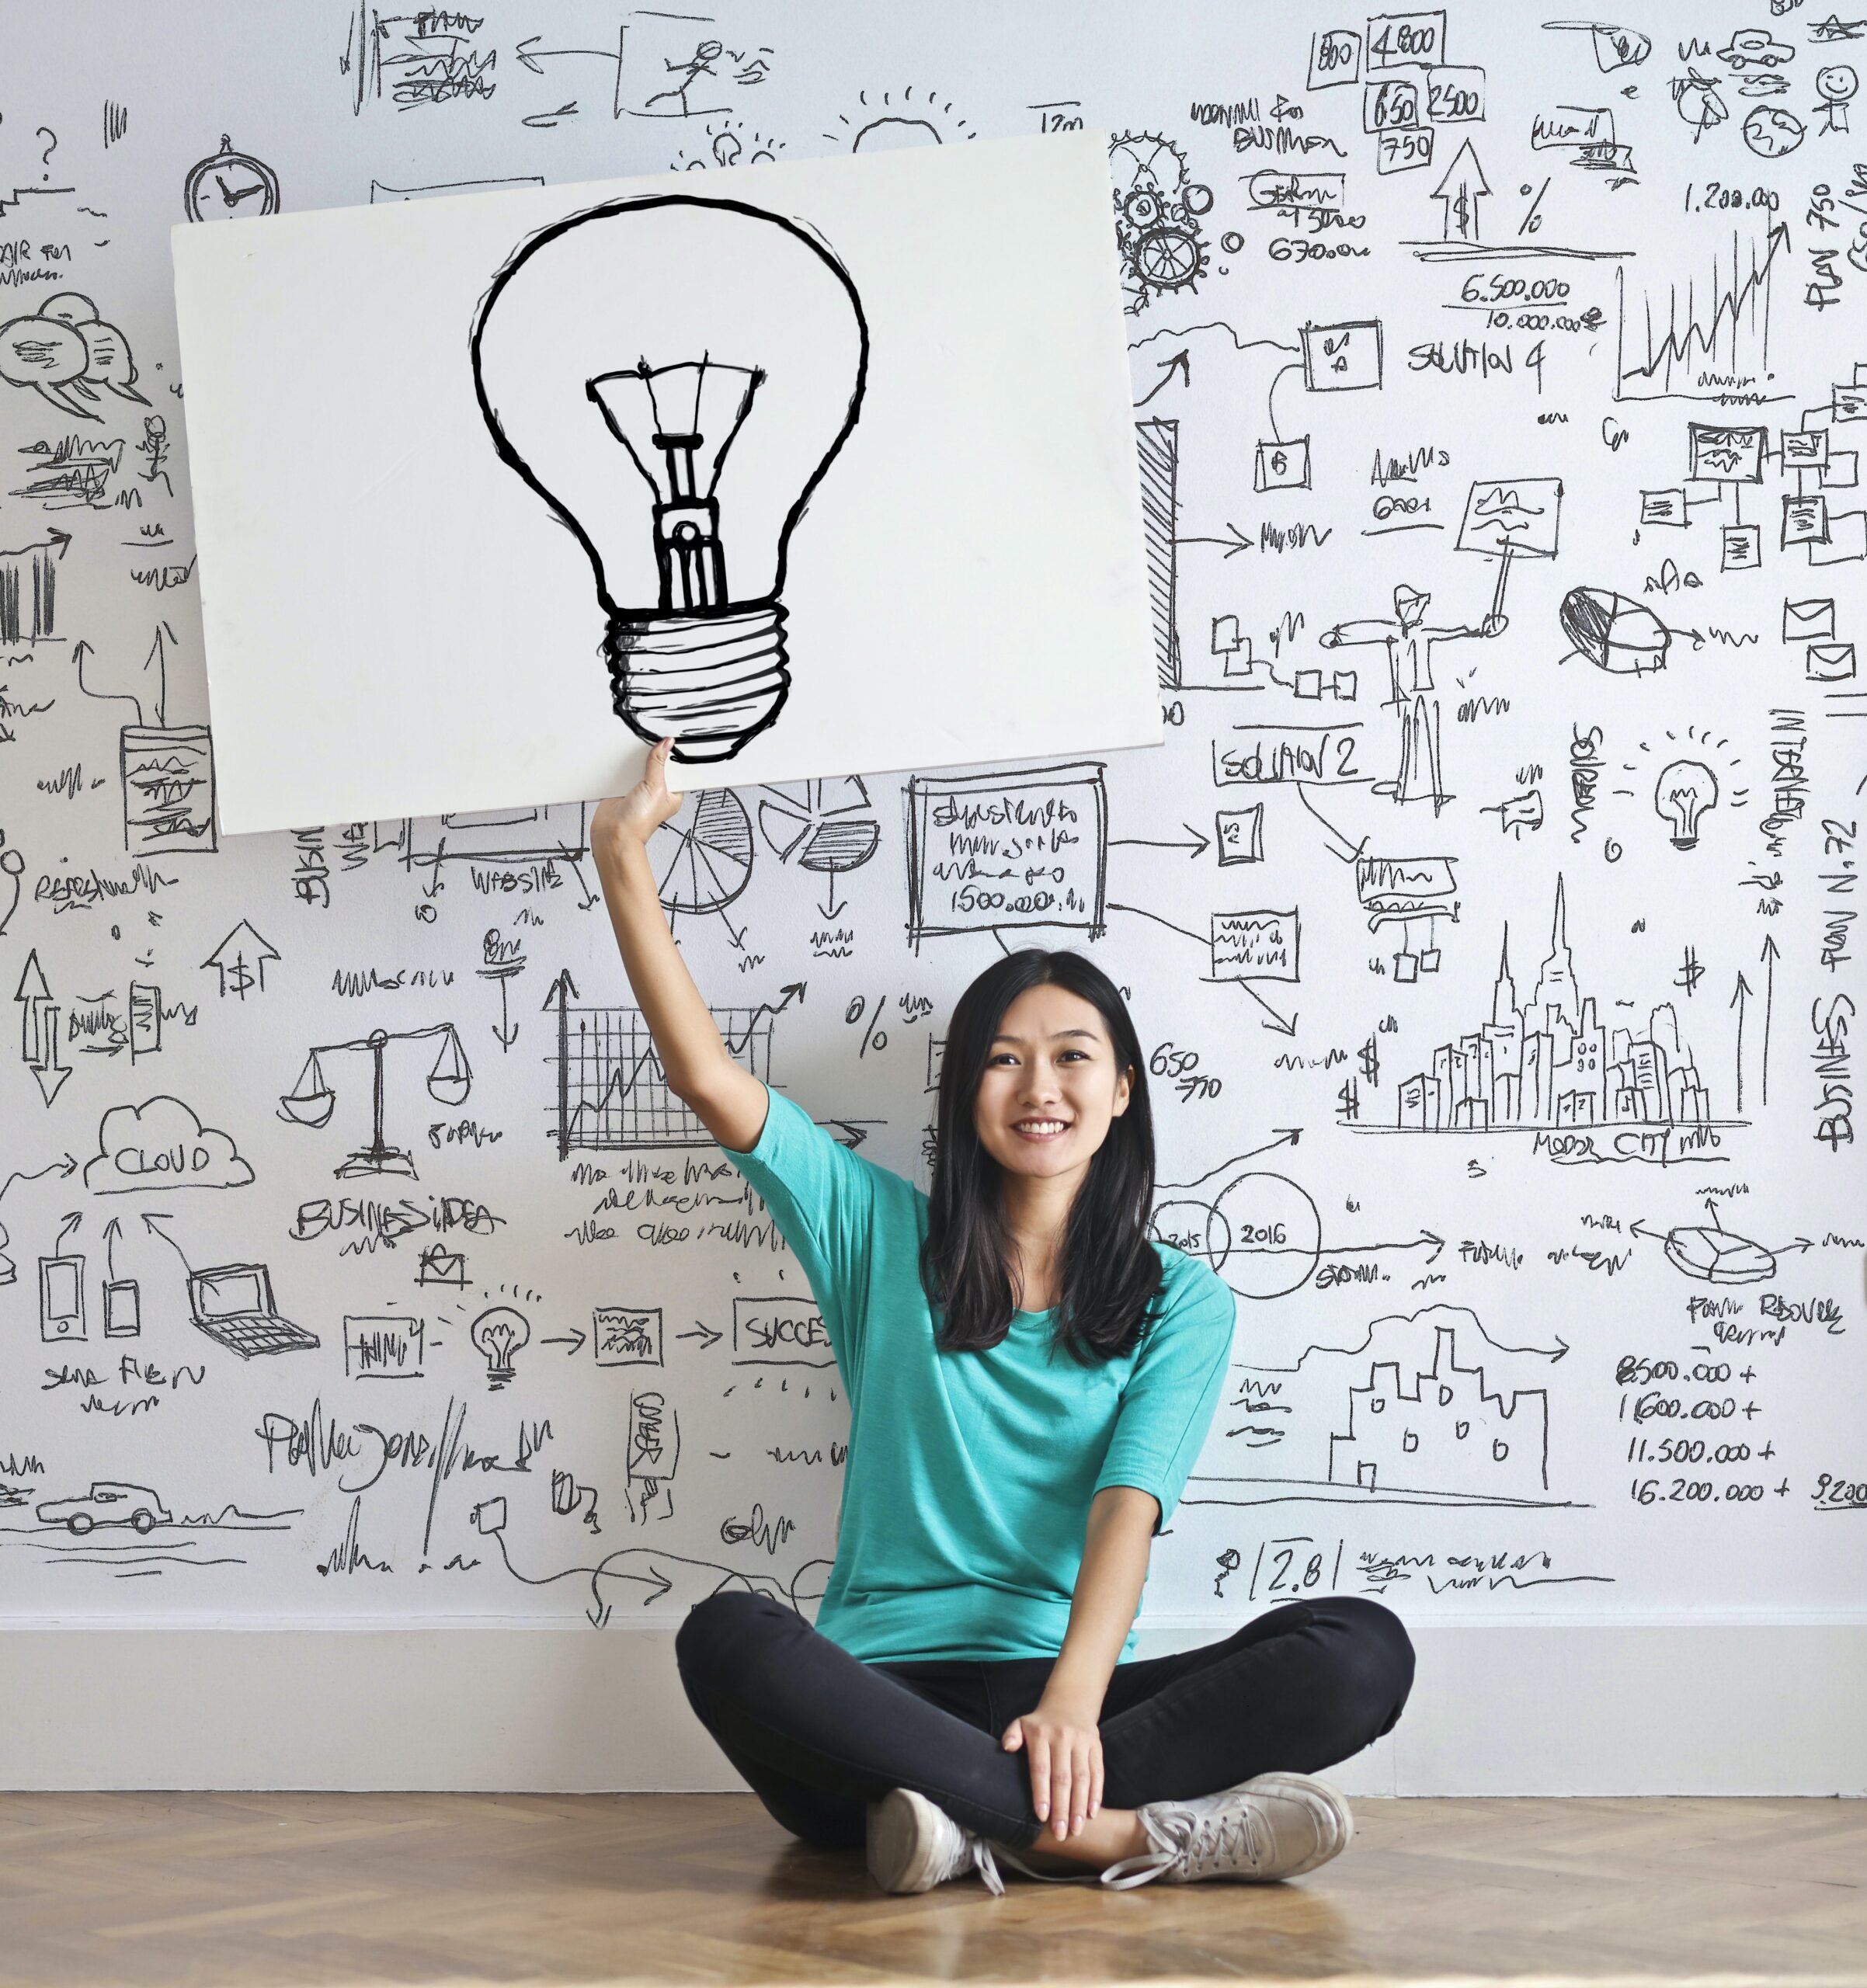 A woman holding up a lightbulb image